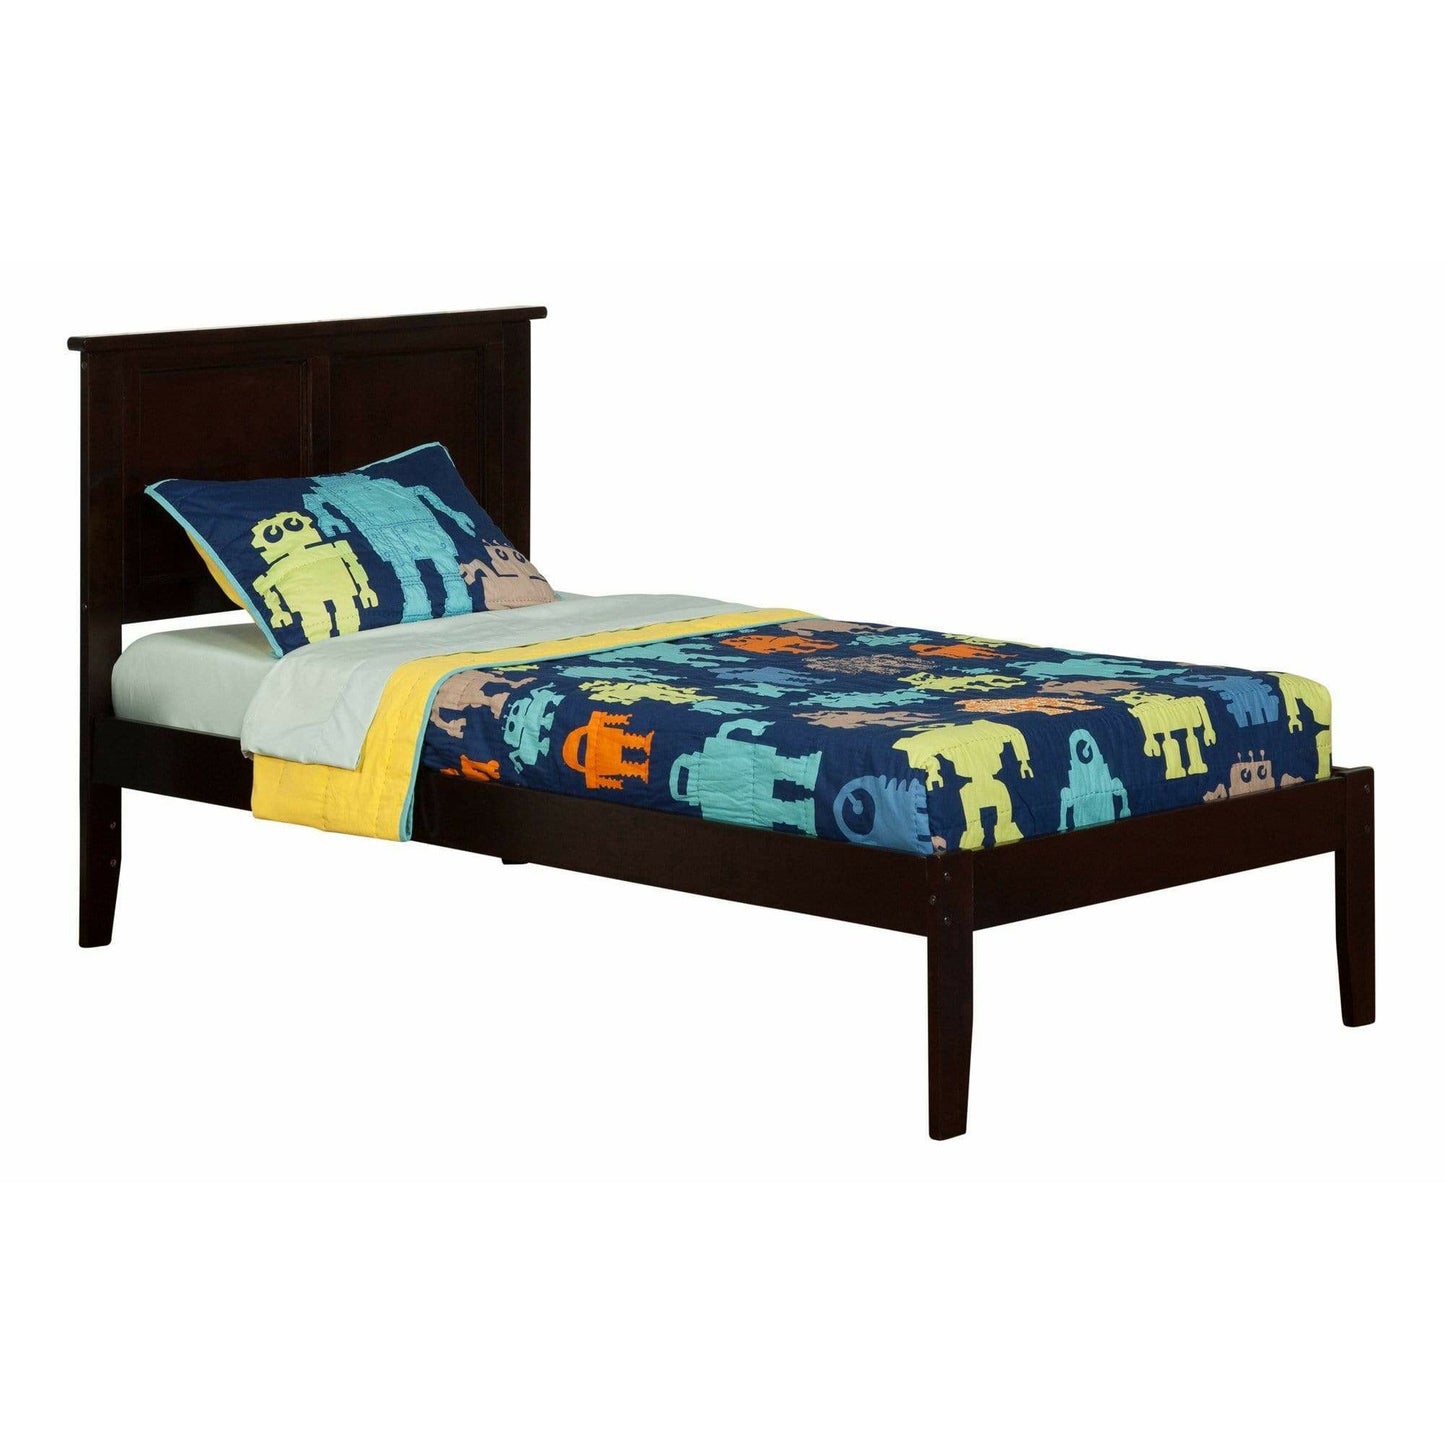 Atlantic Furniture Bed Espresso Madison Twin Platform Bed with Open Foot Board in Espresso